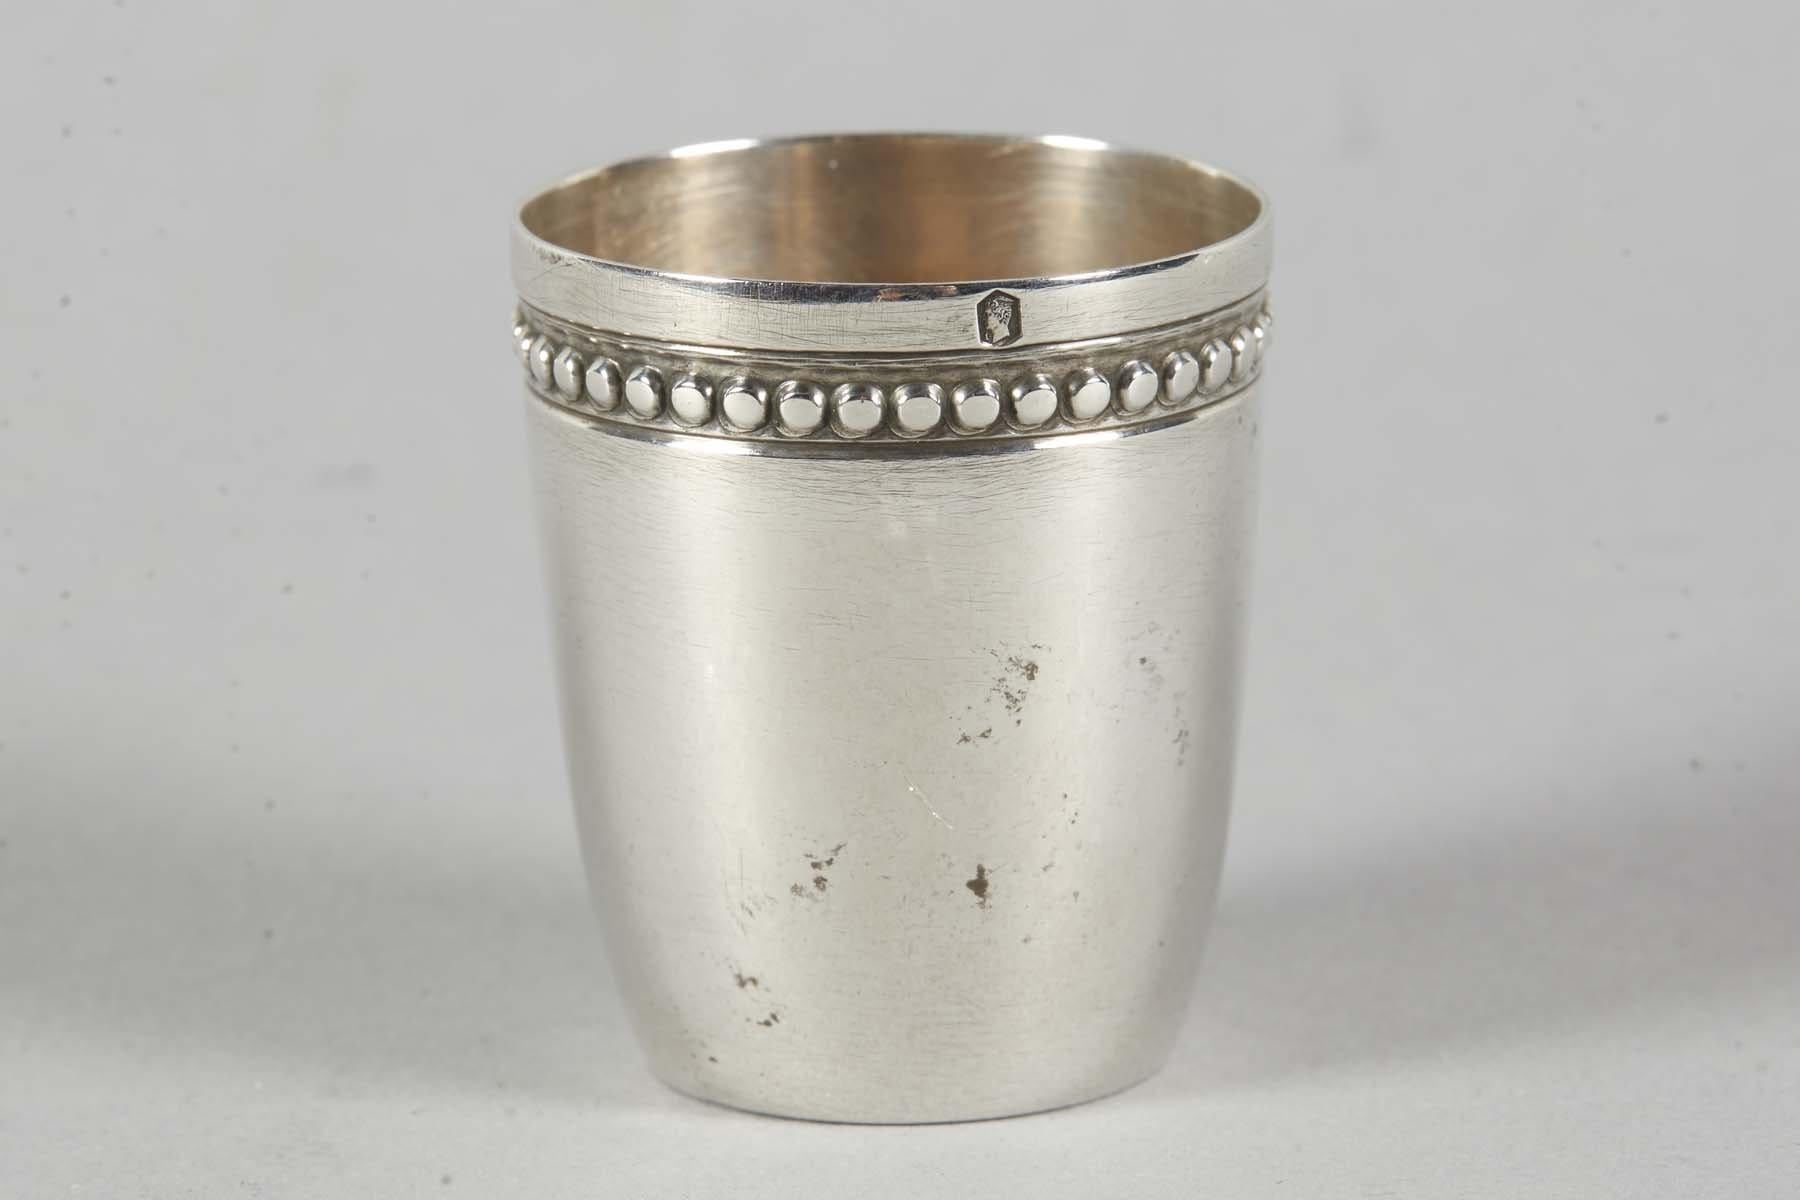 Sterling silver Zionist Schnapps cup, France, circa 1920. 
This shot cup is decorated with a Star of David enclosed in a wreath with a bow, and the word “Zion” in Hebrew. Marked with French silver hallmarks.
This was most likely a “giveaway” to